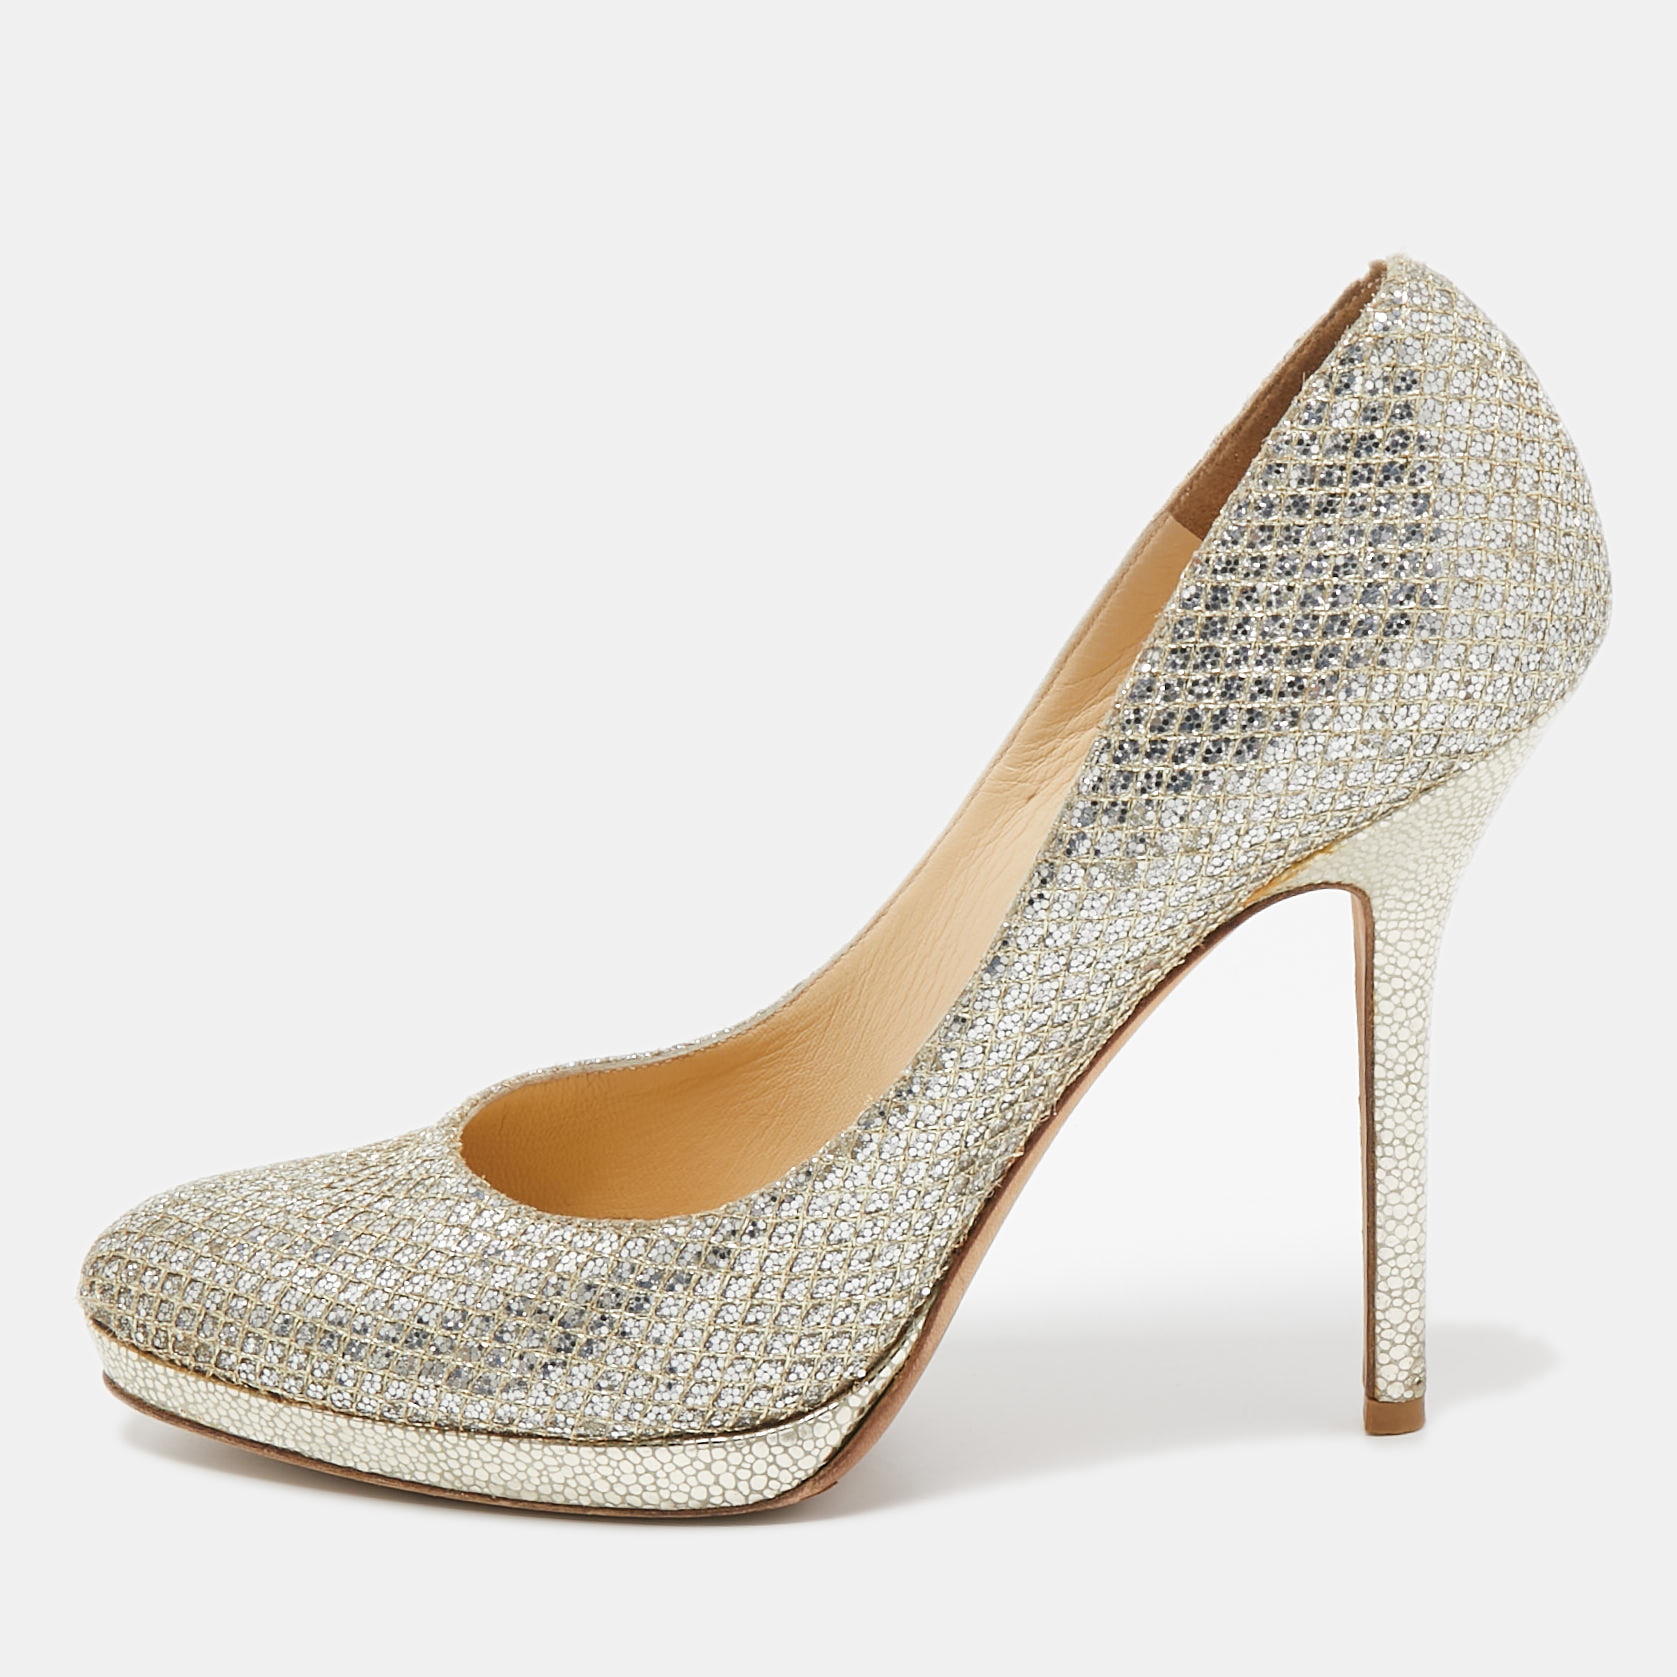 Complement your well put together outfit with these authentic Jimmy Choo glitter pumps. Timeless and classy they have an amazing construction for enduring quality and comfortable fit.